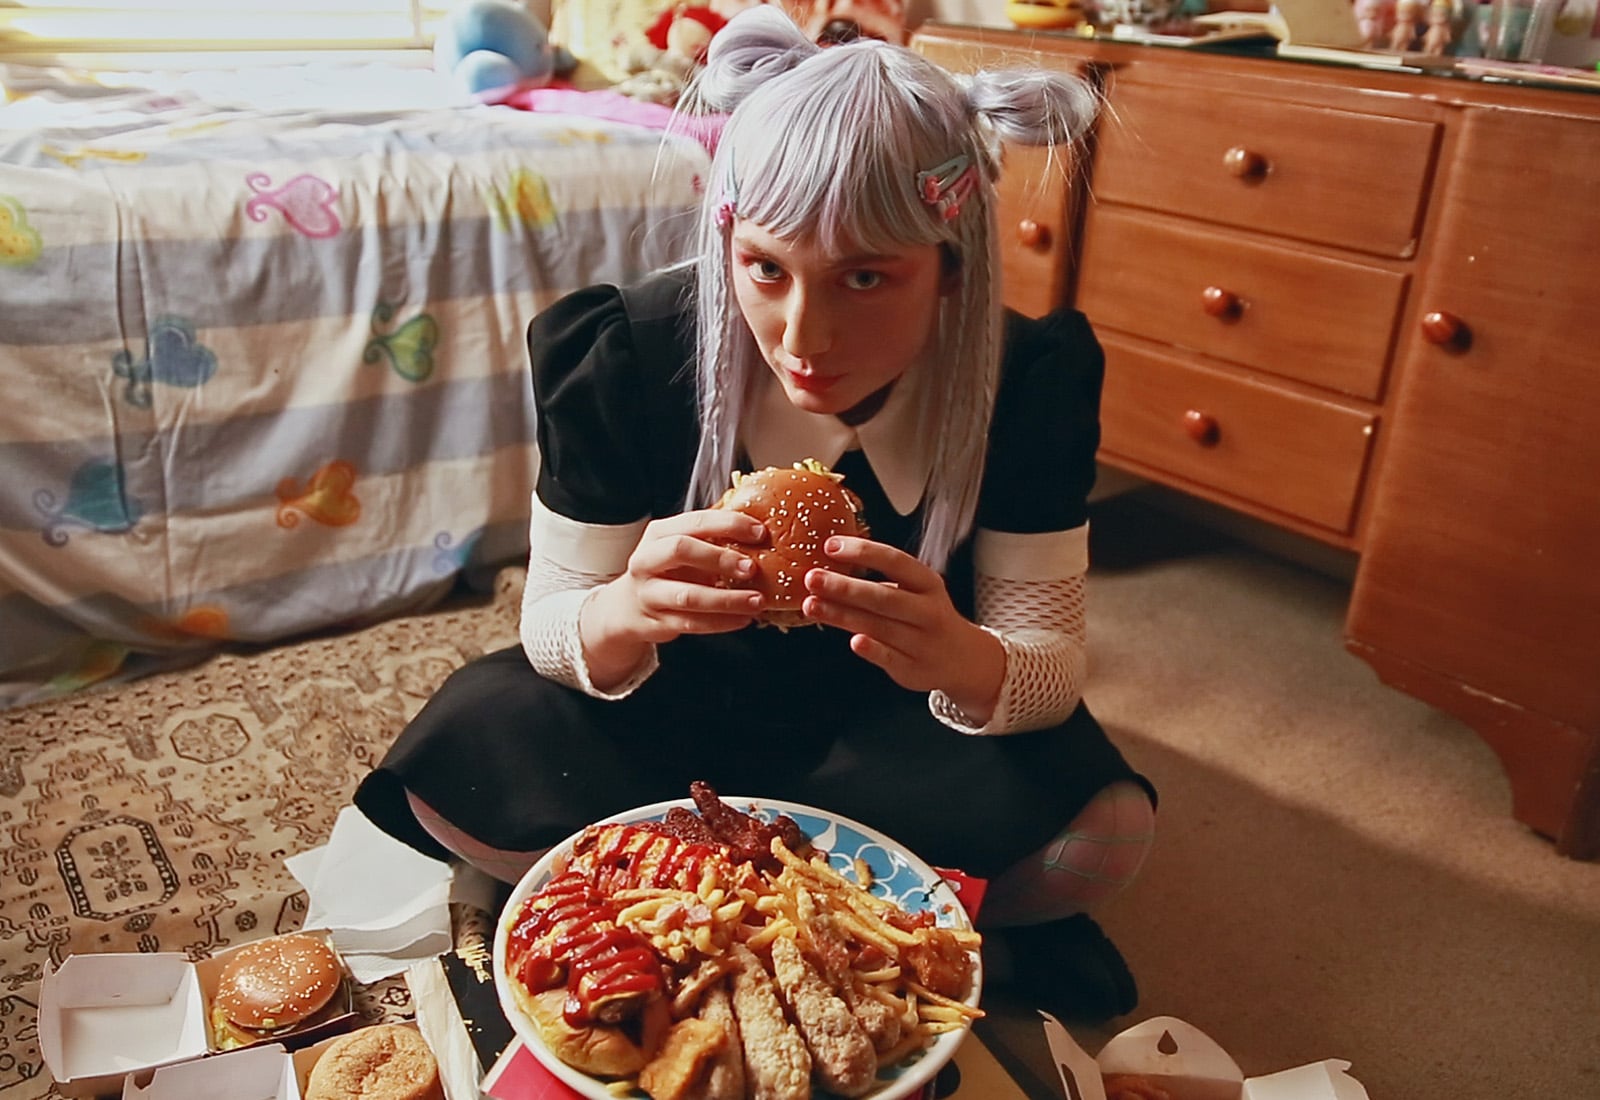 mukbang sydney film festival and diversity in the arts